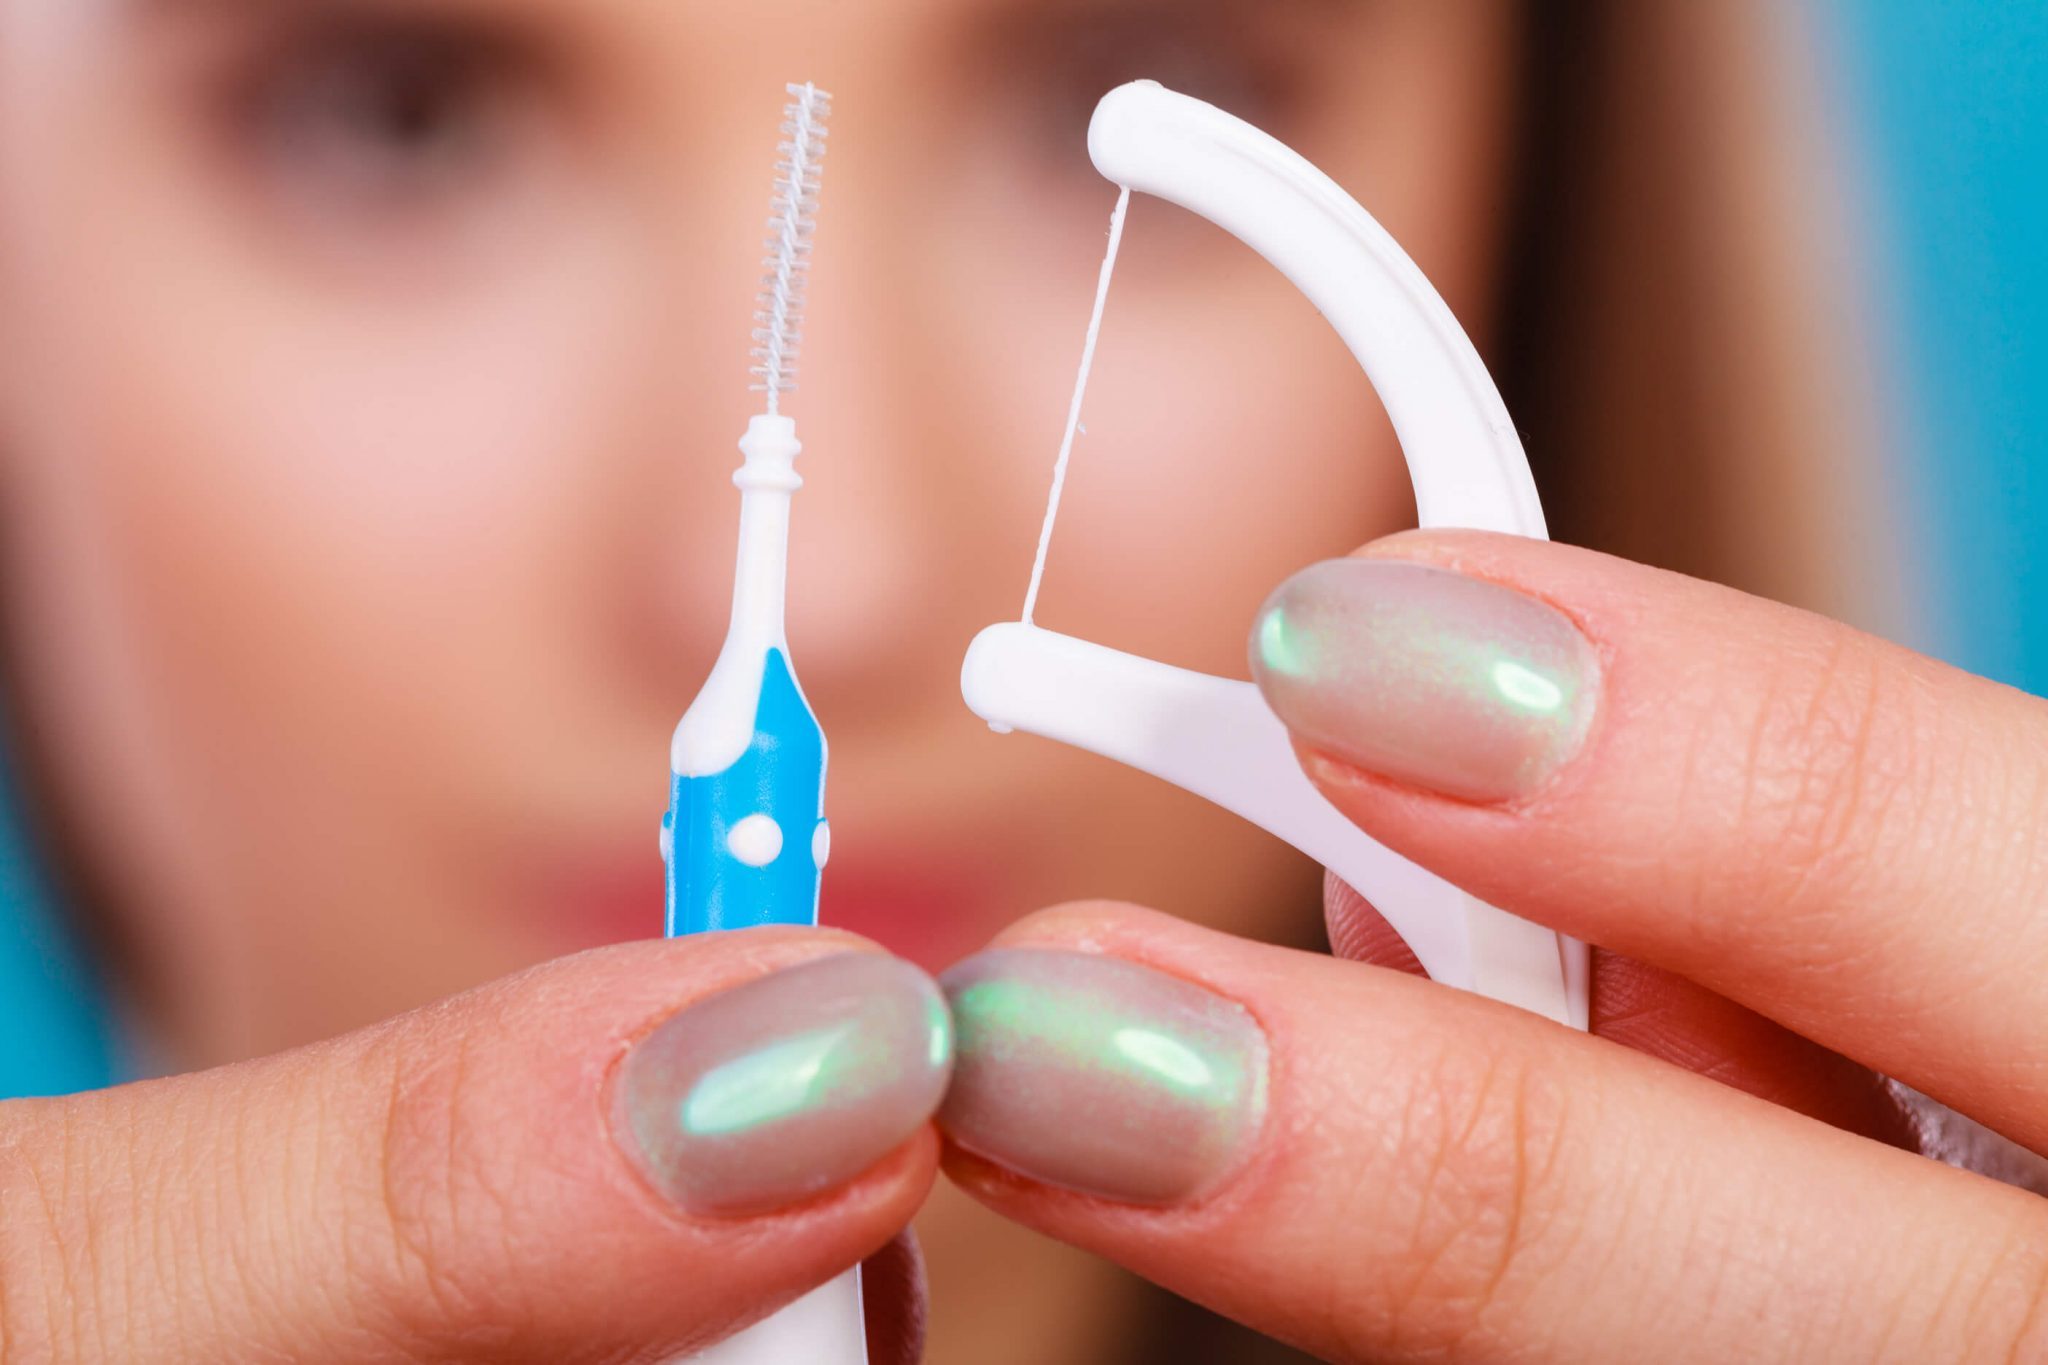 Importance of Using Dental Floss. How Should We Use It?